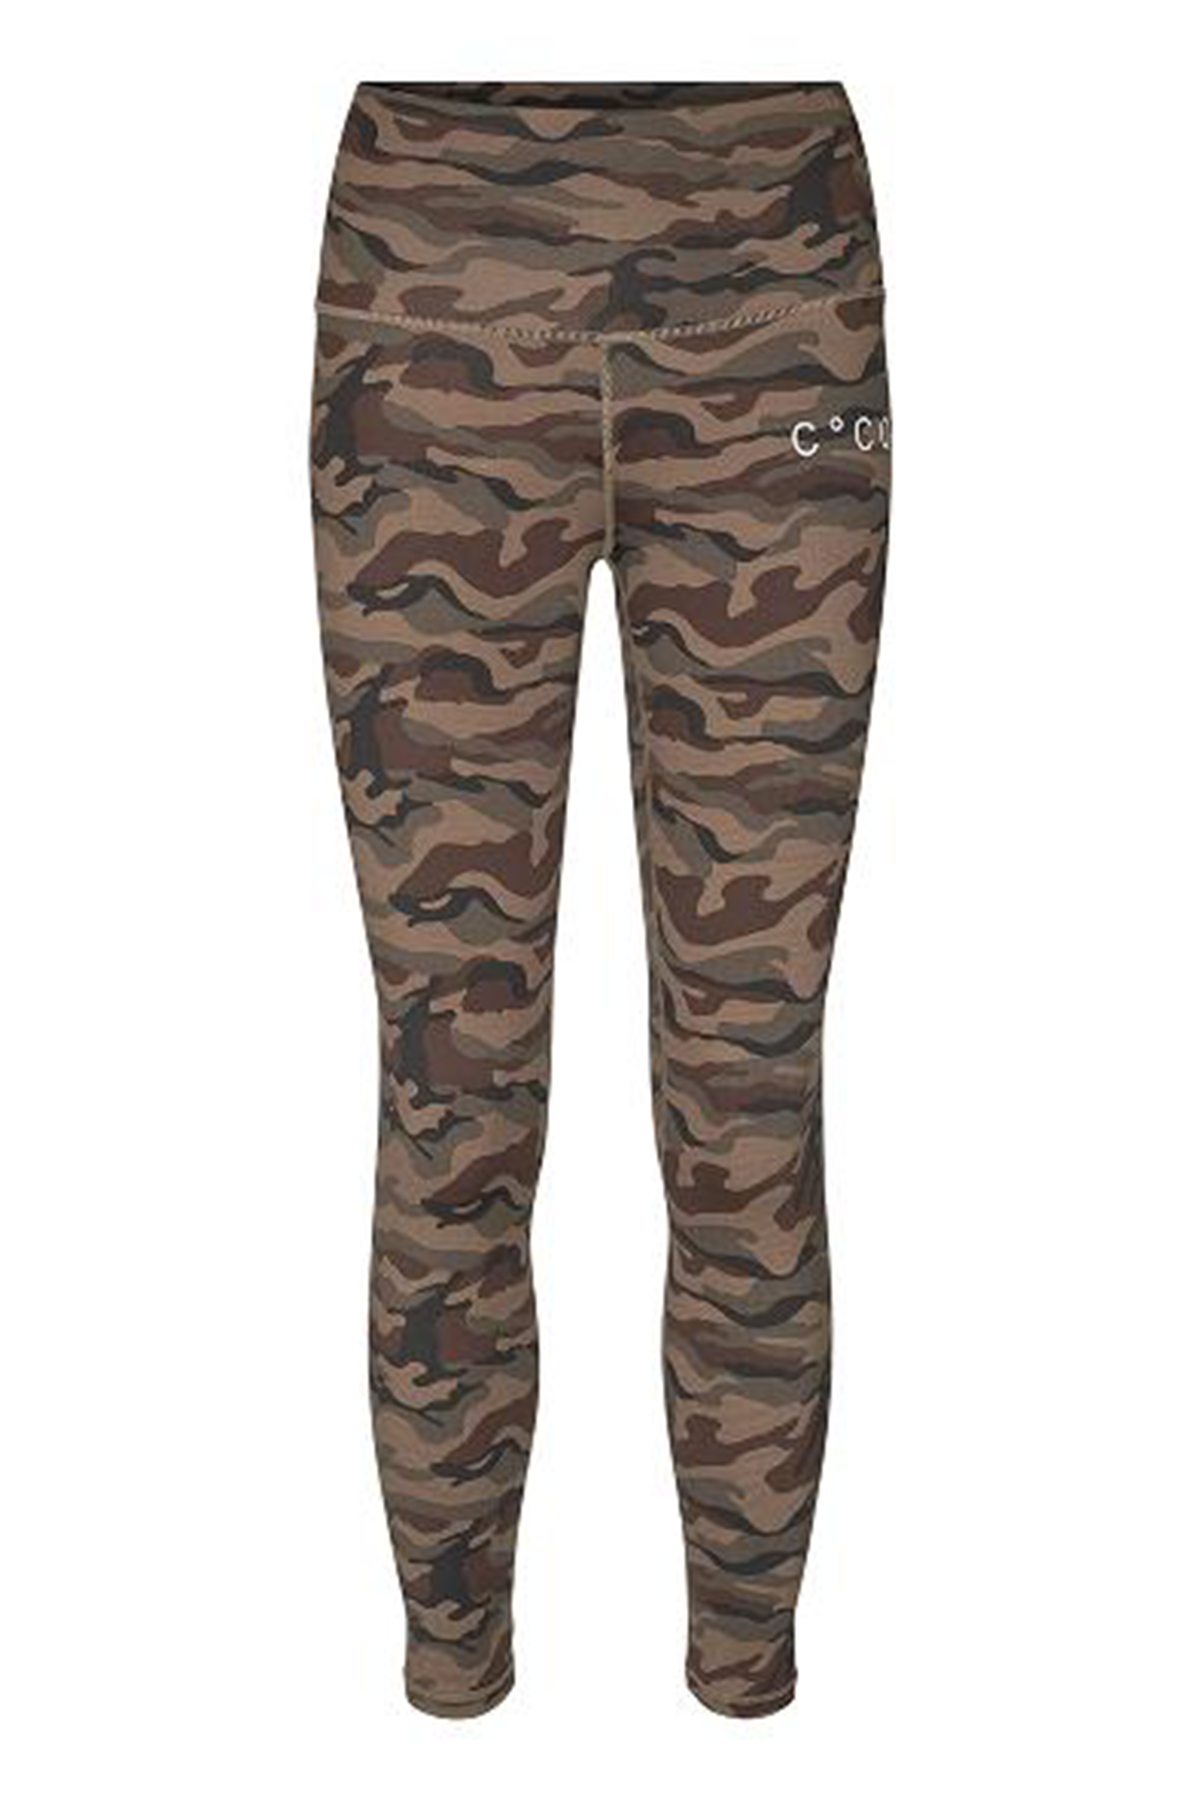 Billede af CO´COUTURE CAMO LEGGINGS 911166 7555 (Army, XS)